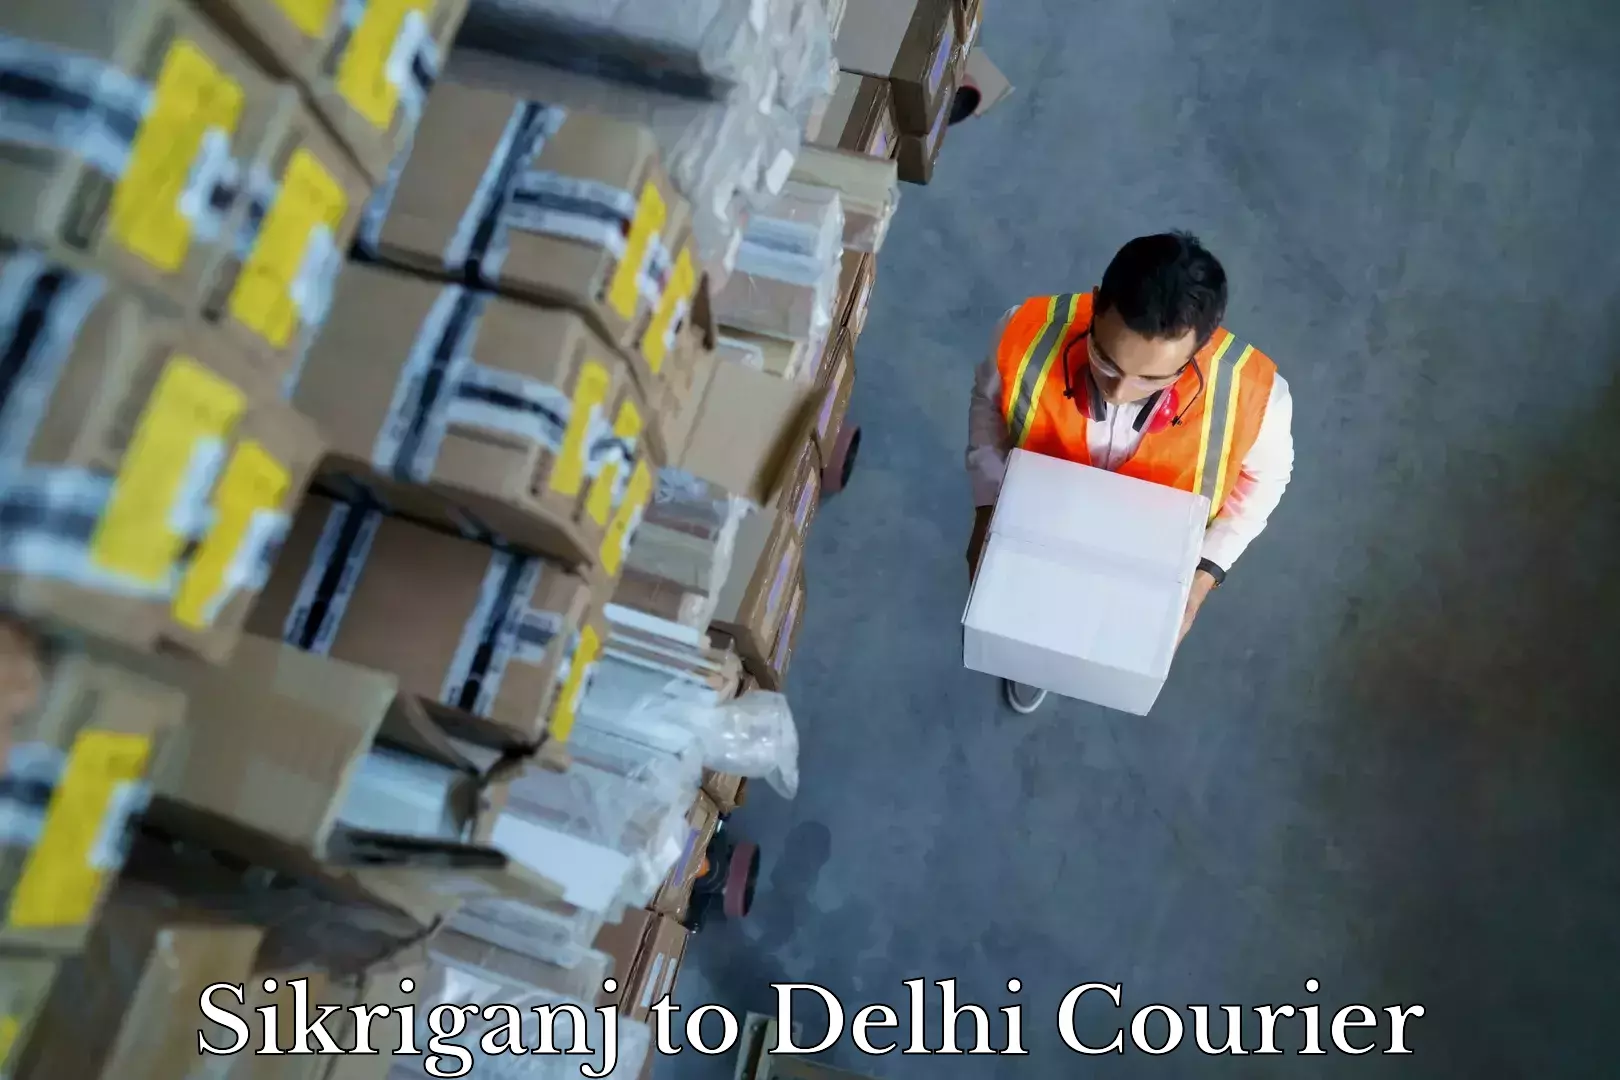 Trusted moving company Sikriganj to Delhi